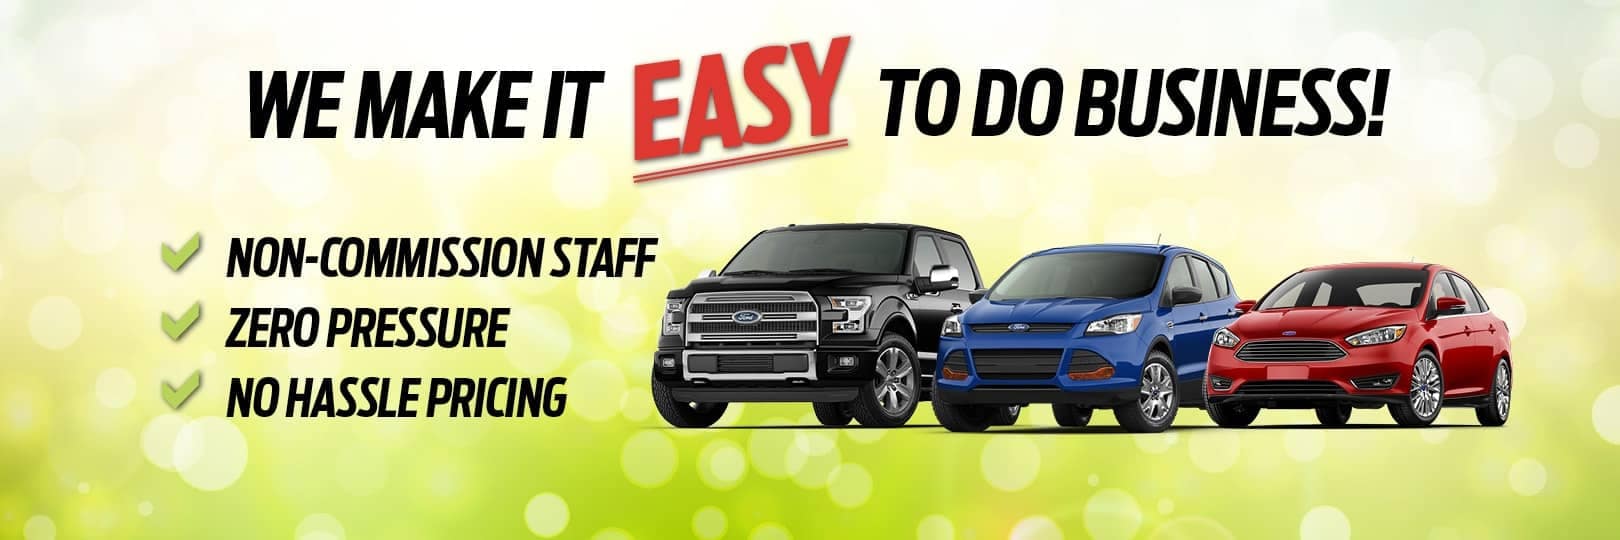 We make it easy Rob Sight Ford image